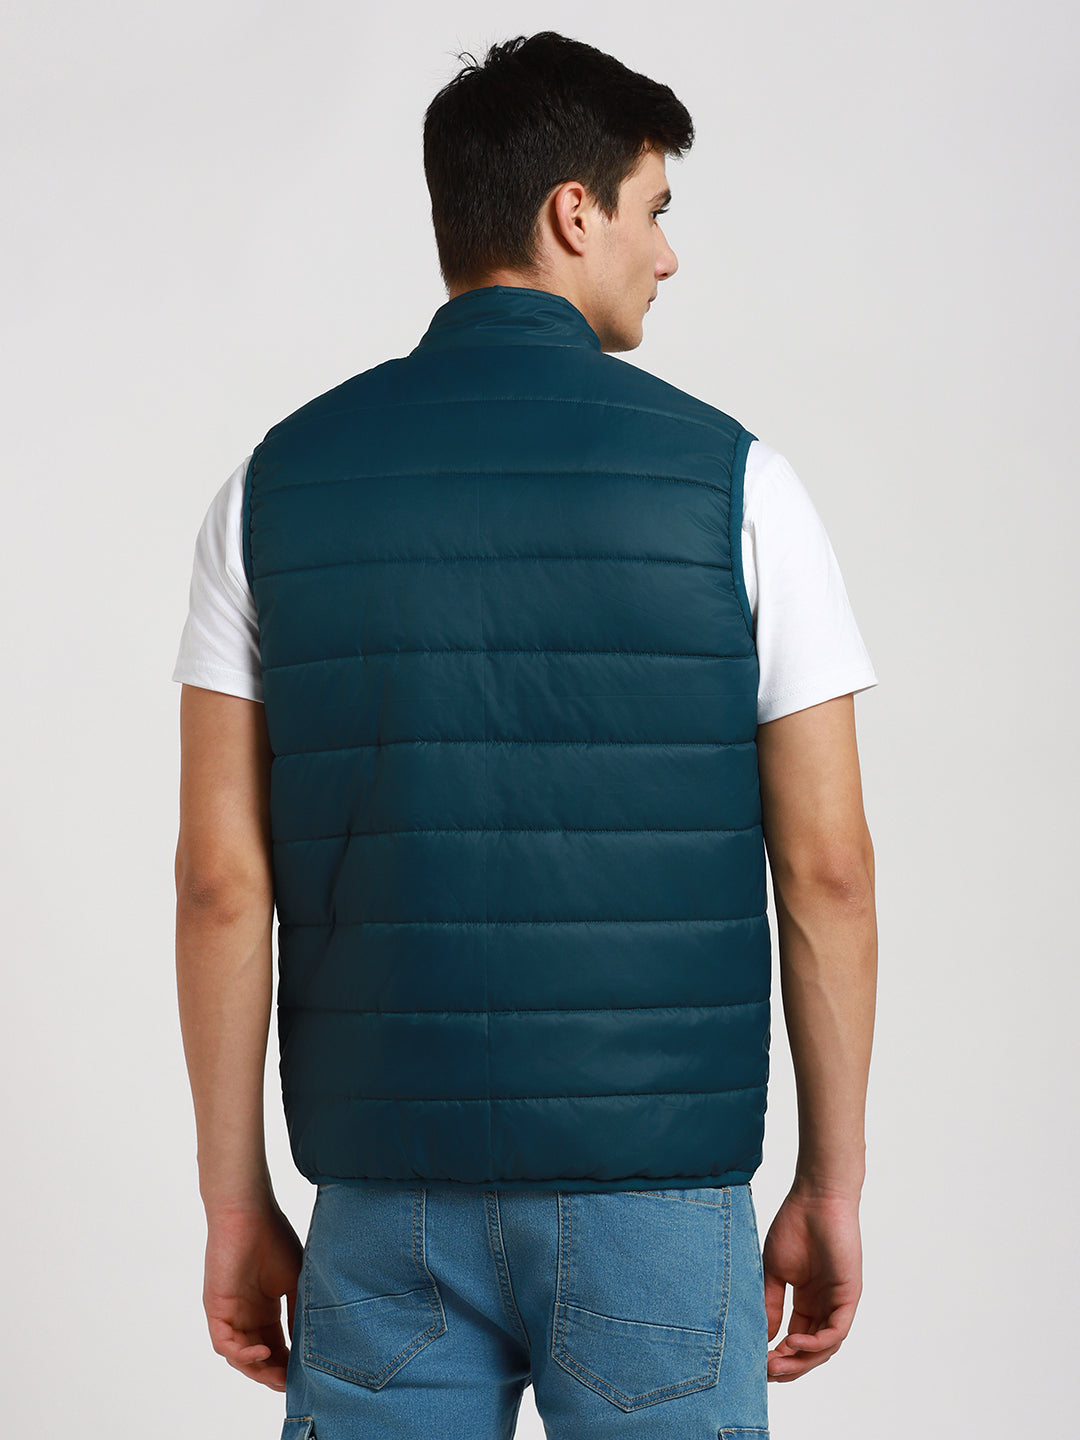 Dennis Lingo Men's Turquoise Green Solid Quilted High Neck Sleeveless Gillet Jackets